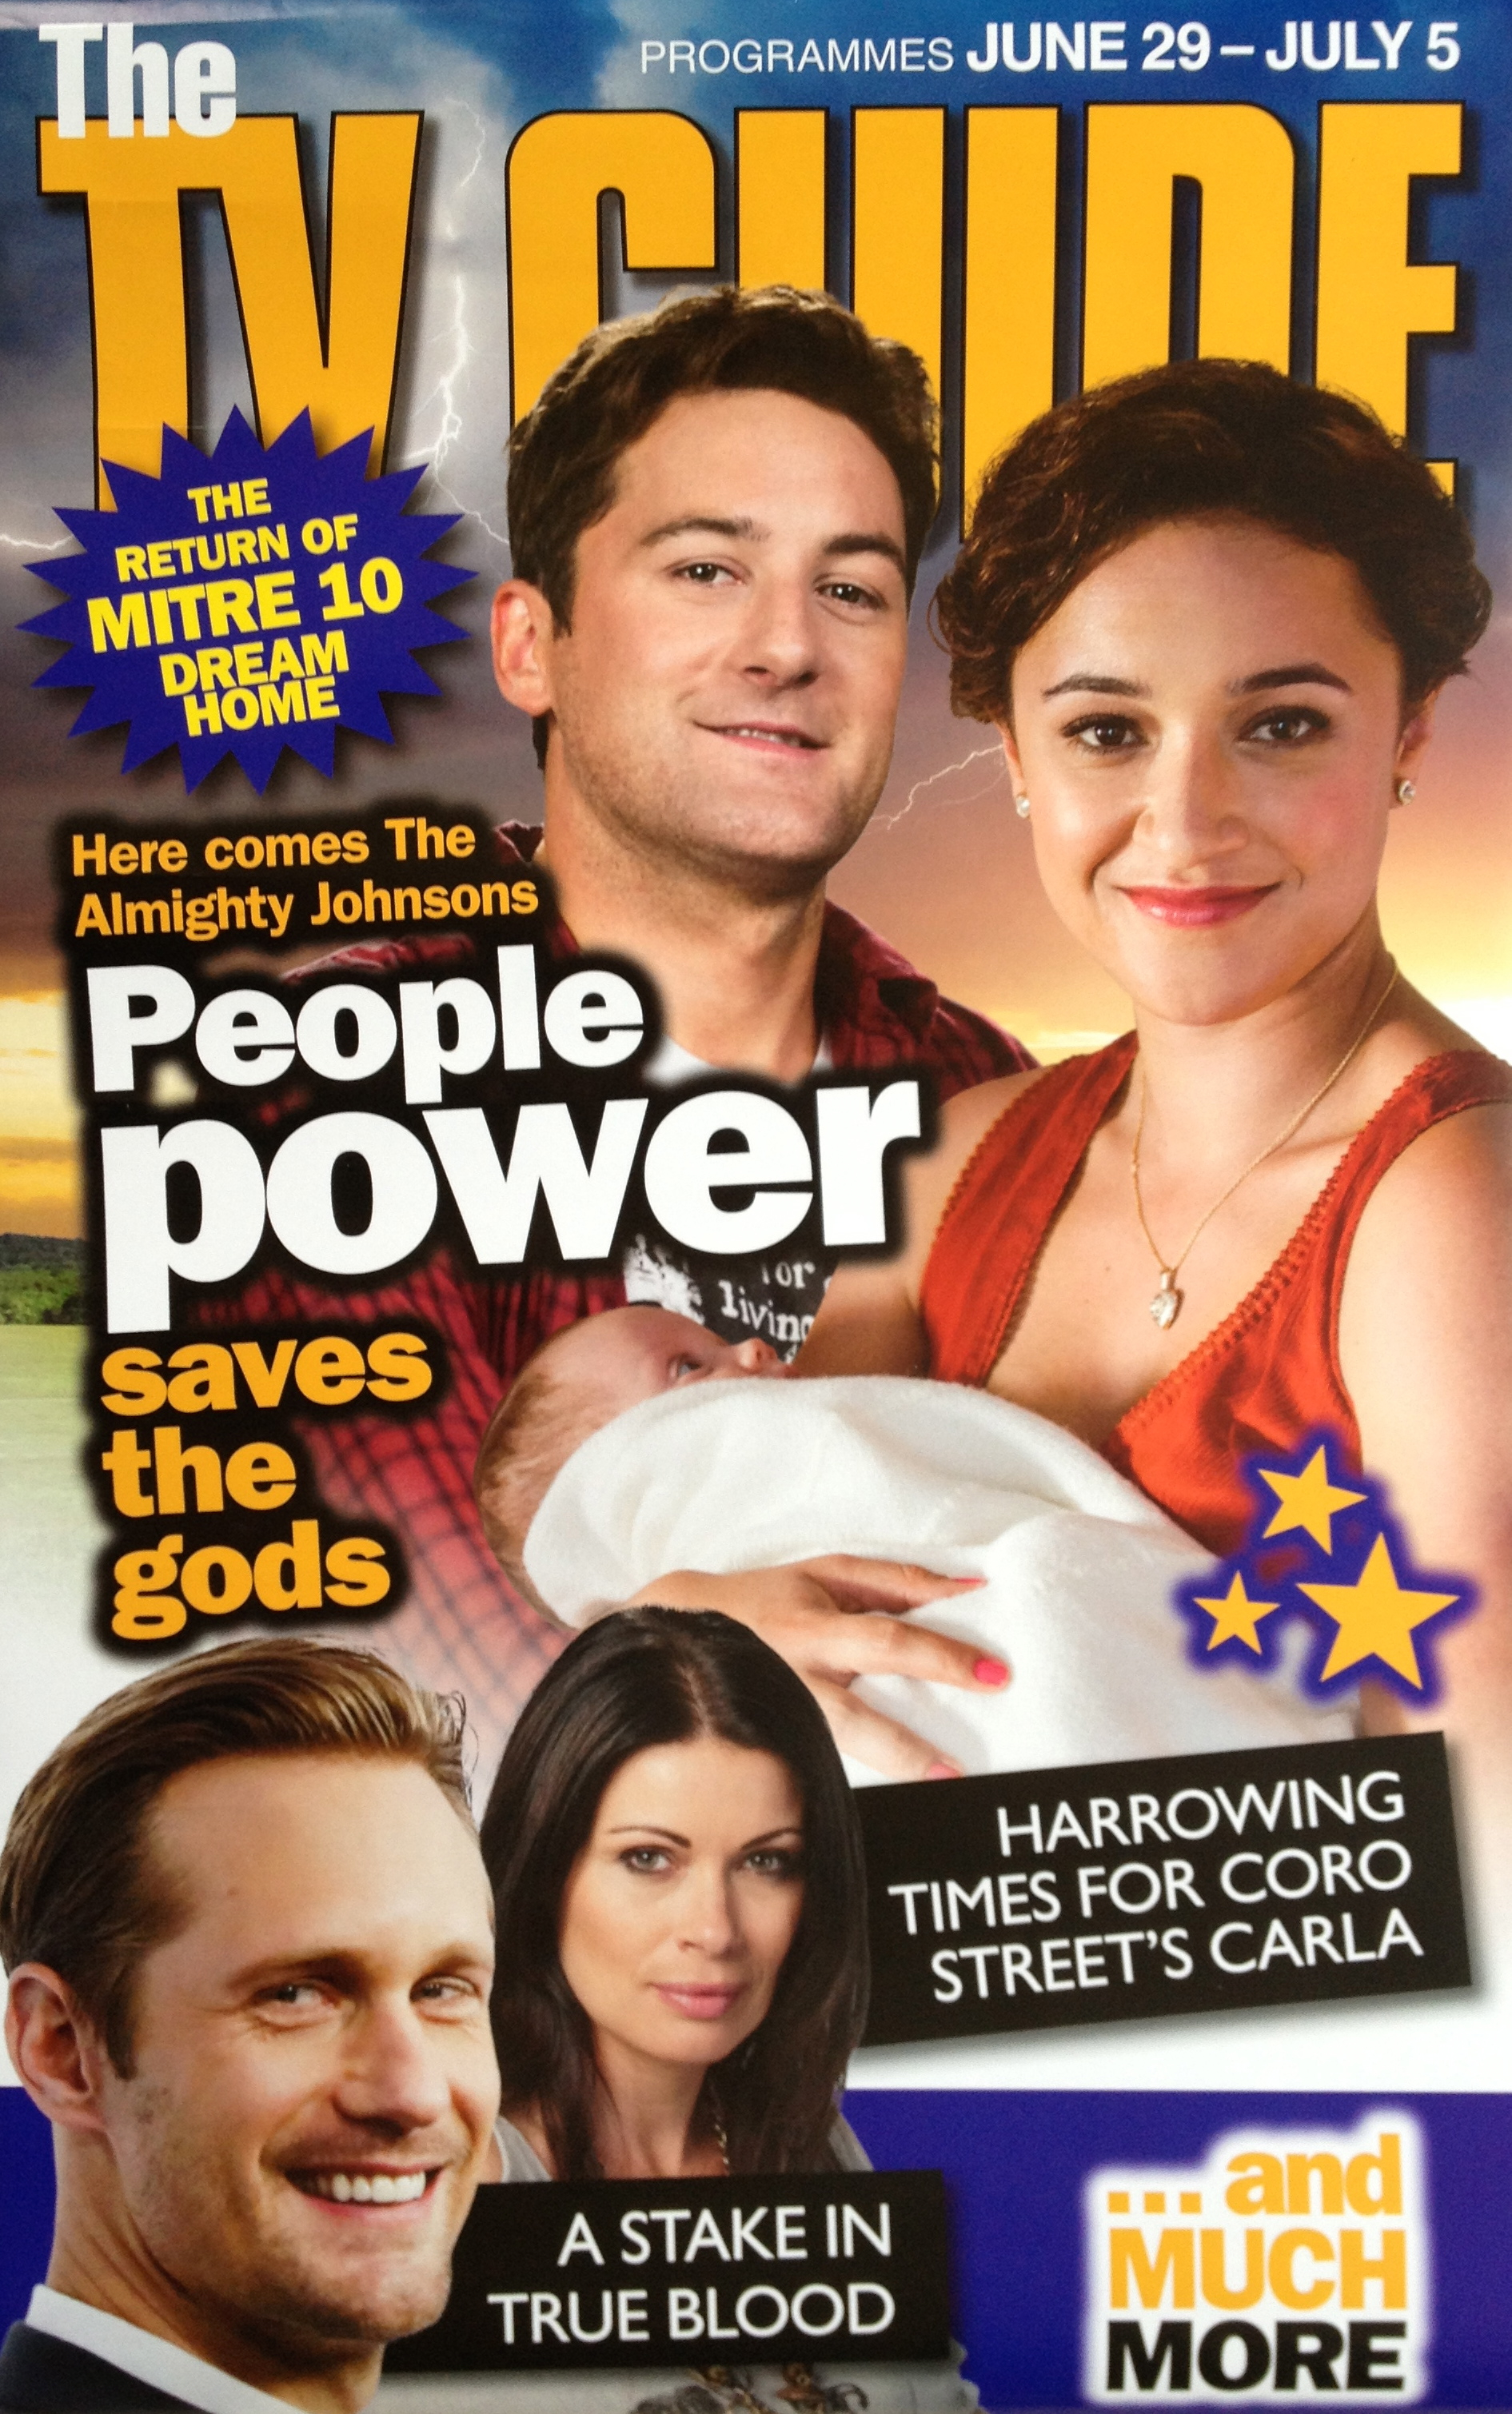 Emmett Skilton and Keisha Castle Hughes on the cover of New Zealand's TV Guide